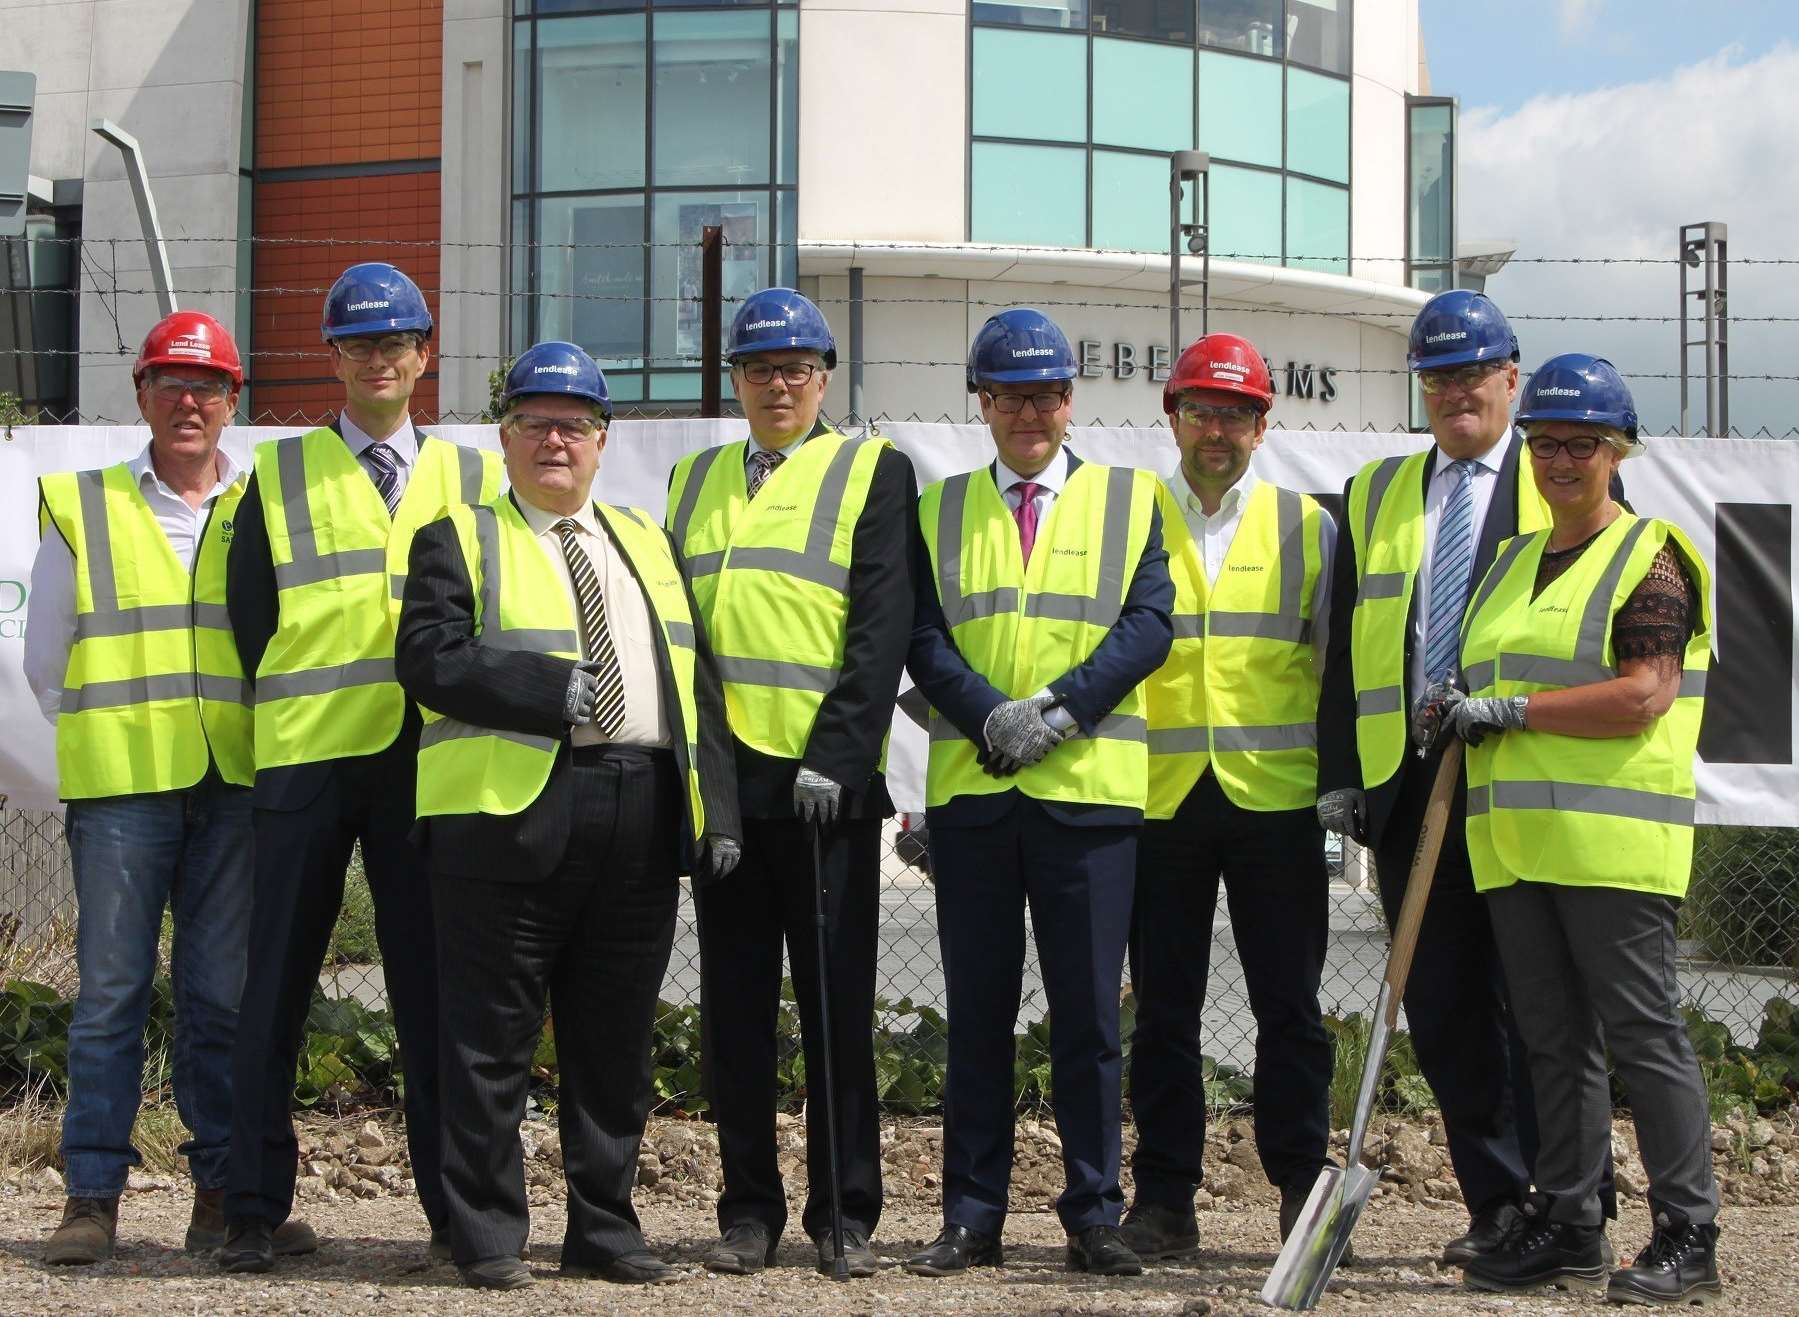 Developers and council chiefs have celebrated the work starting at Elwick Place